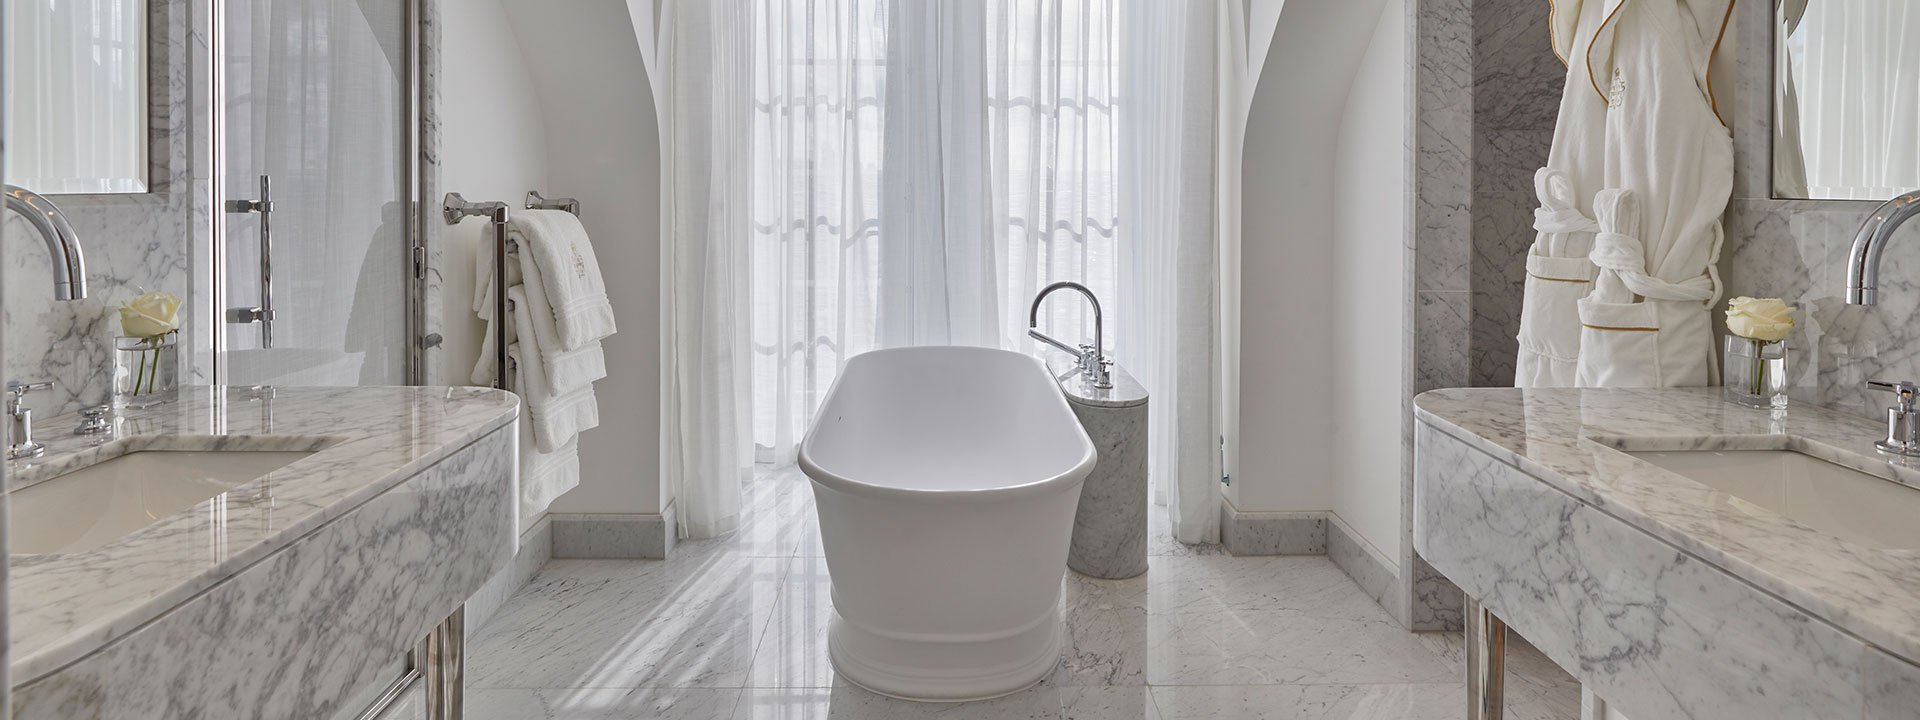 A view of the contemporary marble bathroom, with a central bathtub in the Mayfair Terrace Suite.